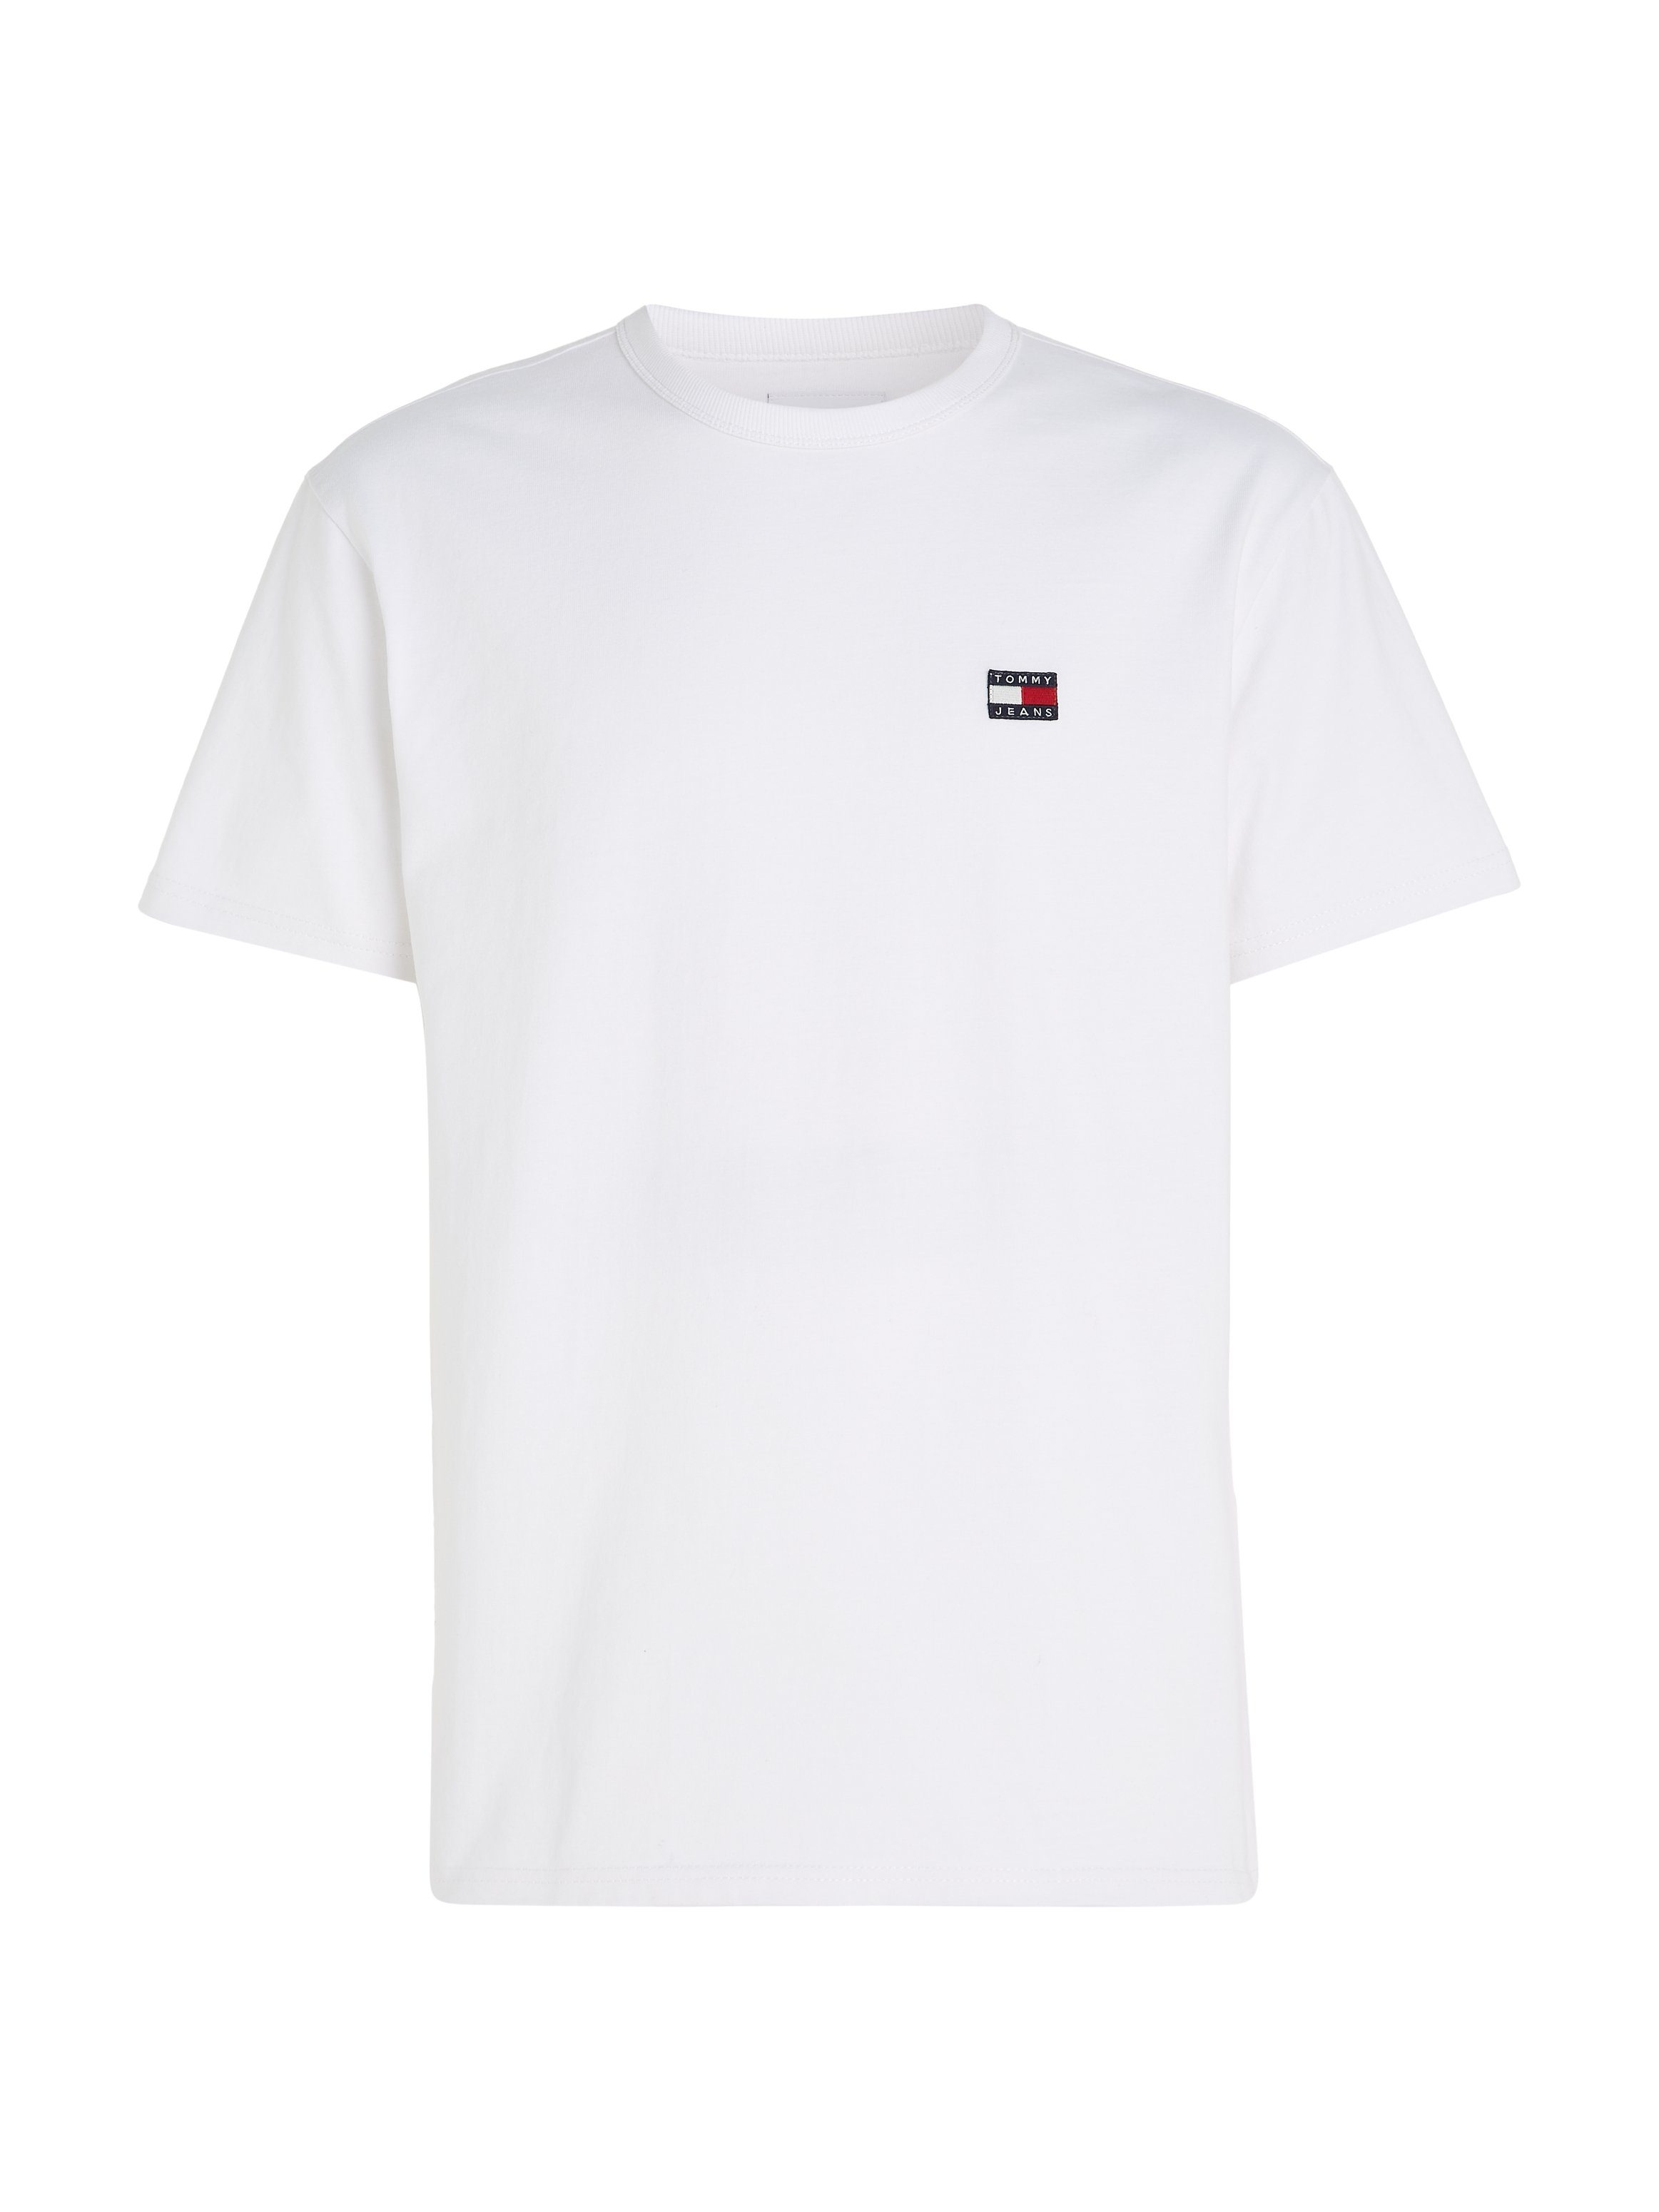 TOMMY Jeans White XS CLSC TJM BADGE TEE T-Shirt Tommy